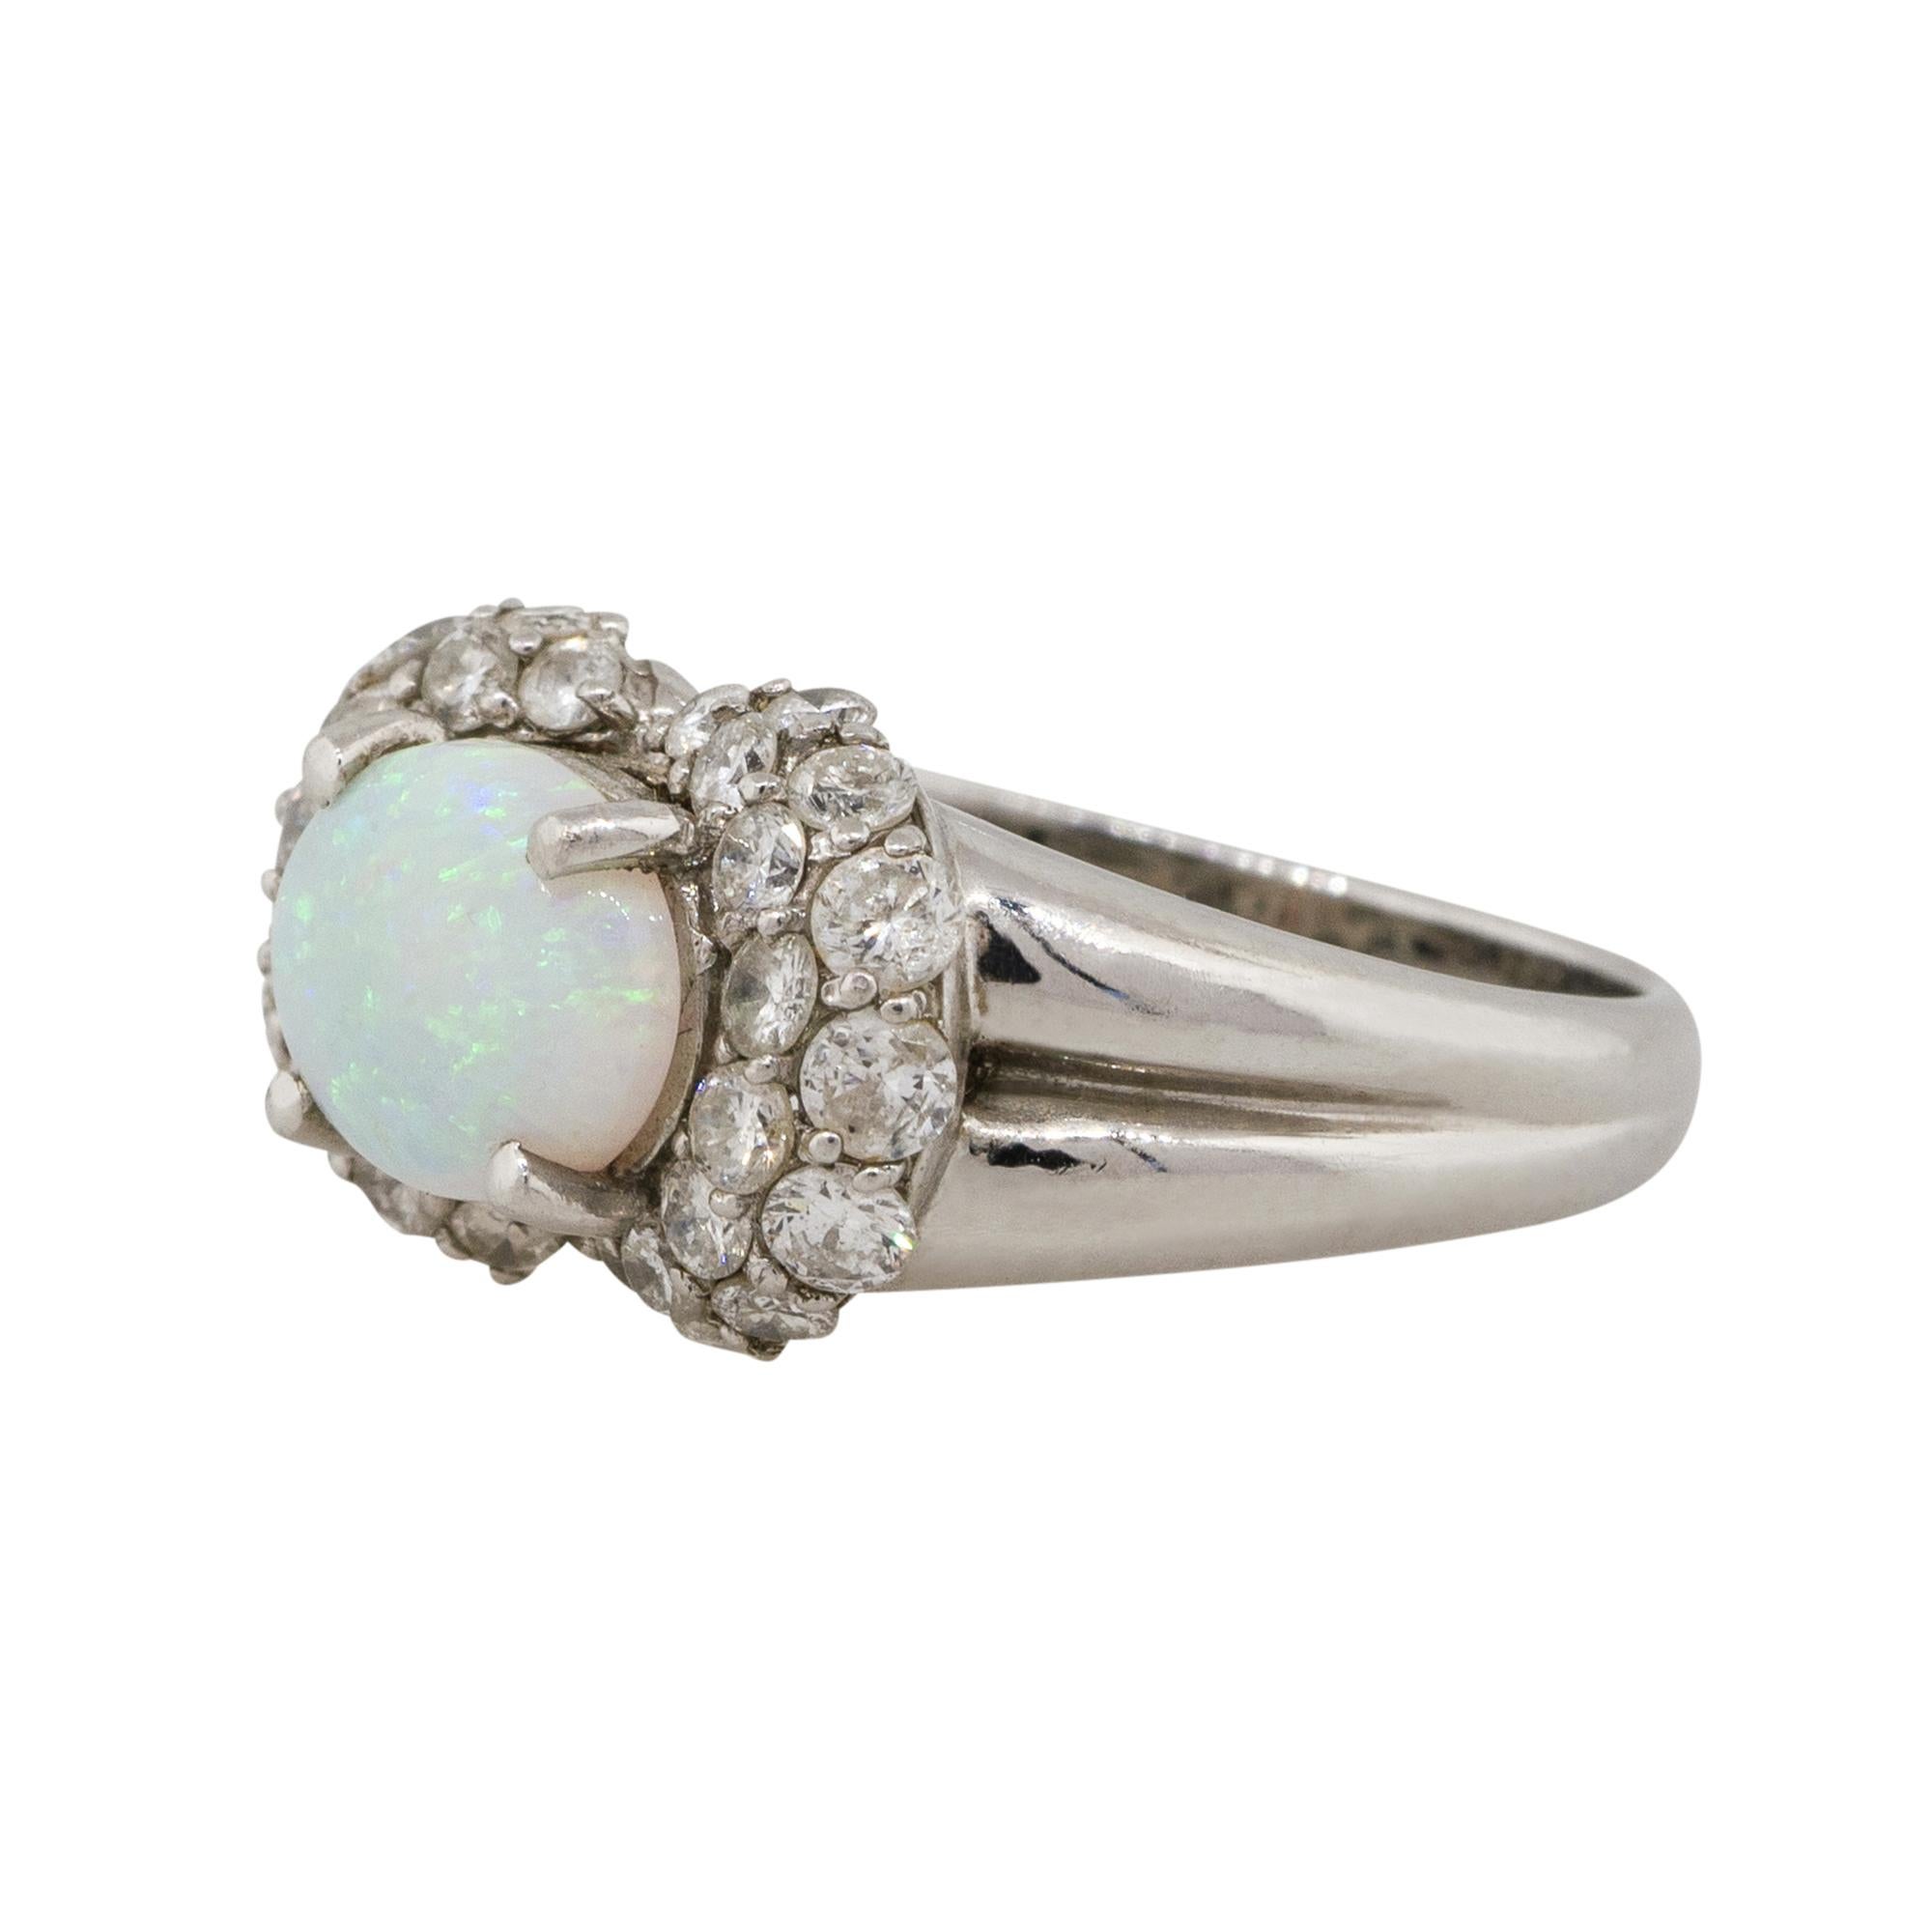 Material: Platinum
Gemstone details: Approx. 1.07ctw Oval shaped Opal center gemstone
Diamond details: Approx. 0.95ctw of Round cut Diamonds. Diamonds are G/H in color and VS in clarity
Ring Size: 6 
Ring Measurements: 0.75